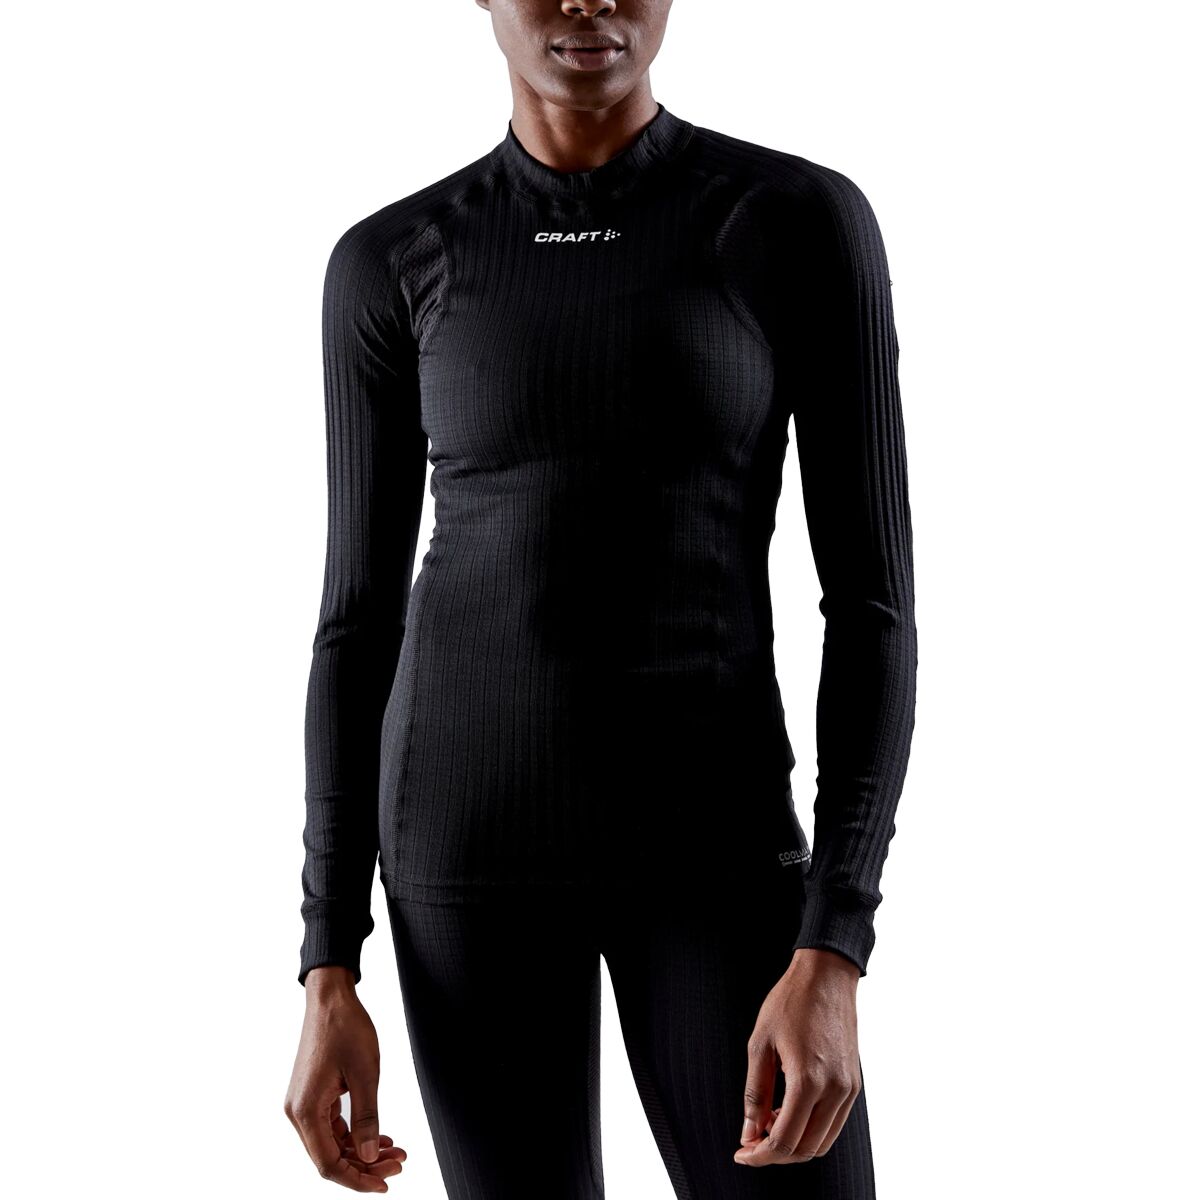 Craft Active Extreme X CN Long-Sleeve Top - Women's Black, L